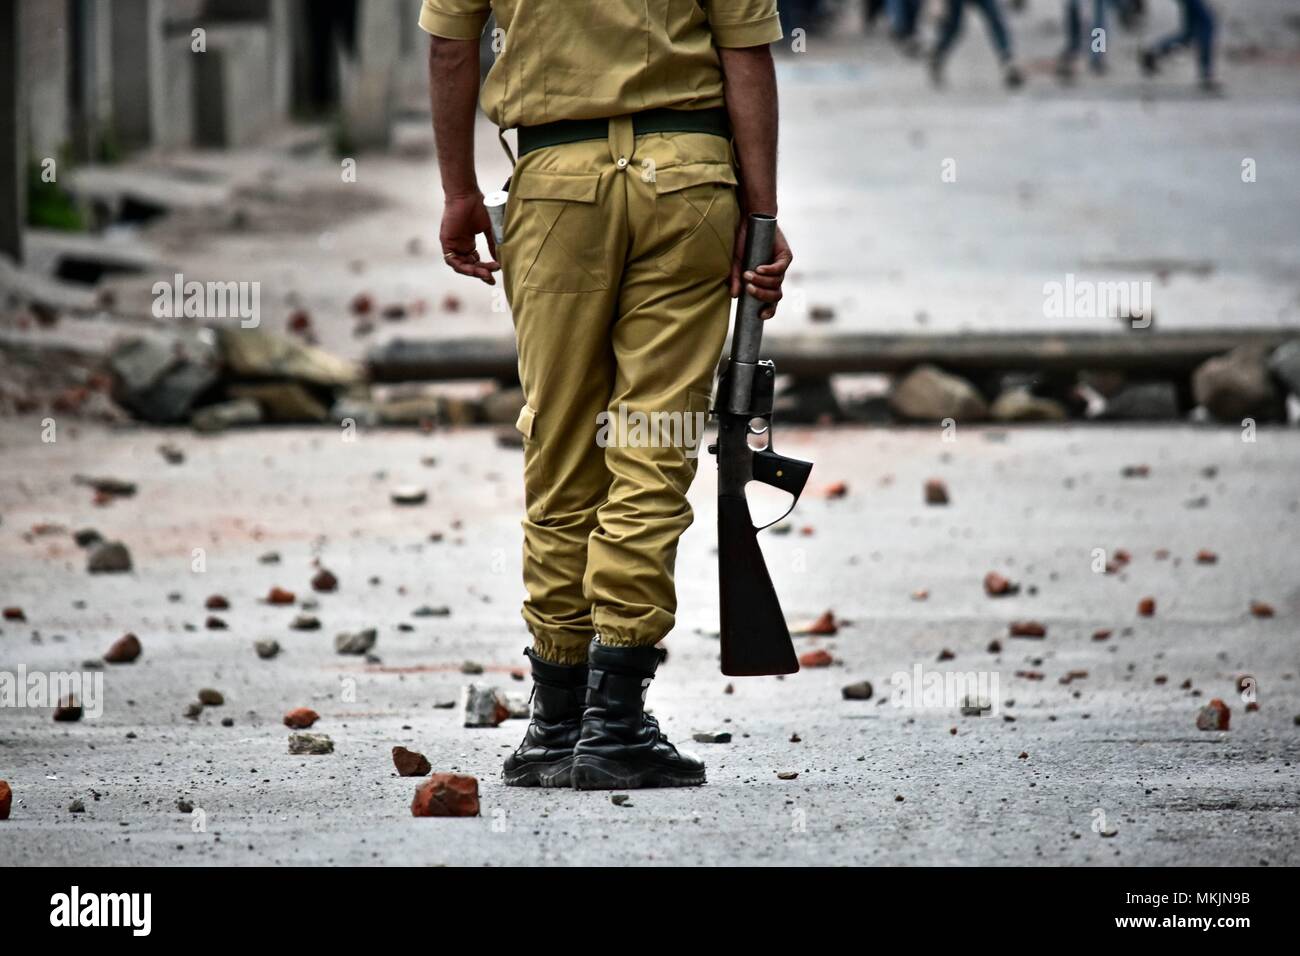 Srinagar, Kashmir. 8th May 2018. An policeman stands still during clashes in Srinagar, Kashmir. Fierce clashes broke out between government forces and Kashmiri protesters in Srinagar on Tuesday as the valley continued to remain tense over the killing of 11 people including 5 militants and 6 civilians in Kashmir. Police used tear smoke shells and shot gun pellets to disperse hundreds of demonstrators who hurled rocks and chanted anti-and pro-freedom slogans. Credit: SOPA Images Limited/Alamy Live News Stock Photo